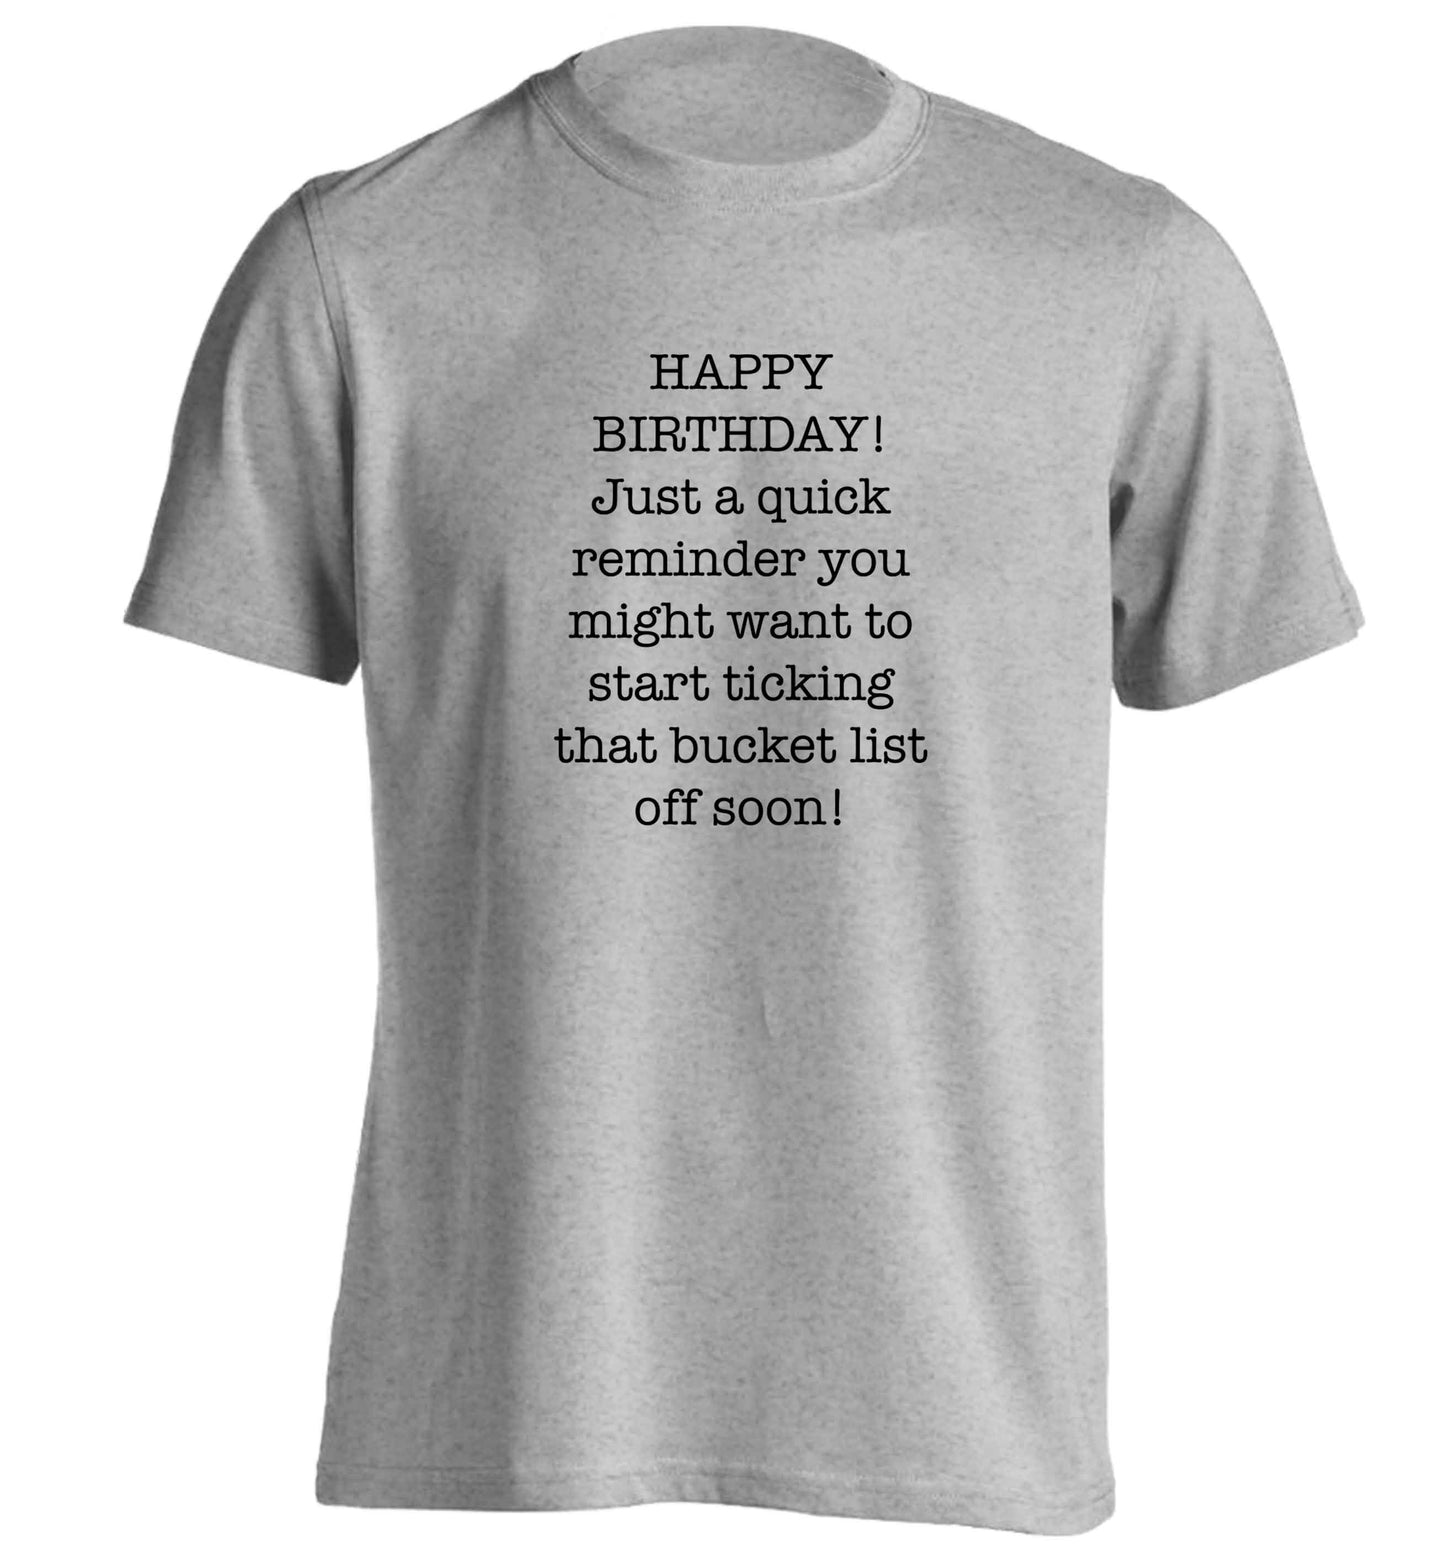 Happy birthday, just a quick reminder you might want to start ticking that bucket list off soon adults unisex grey Tshirt 2XL